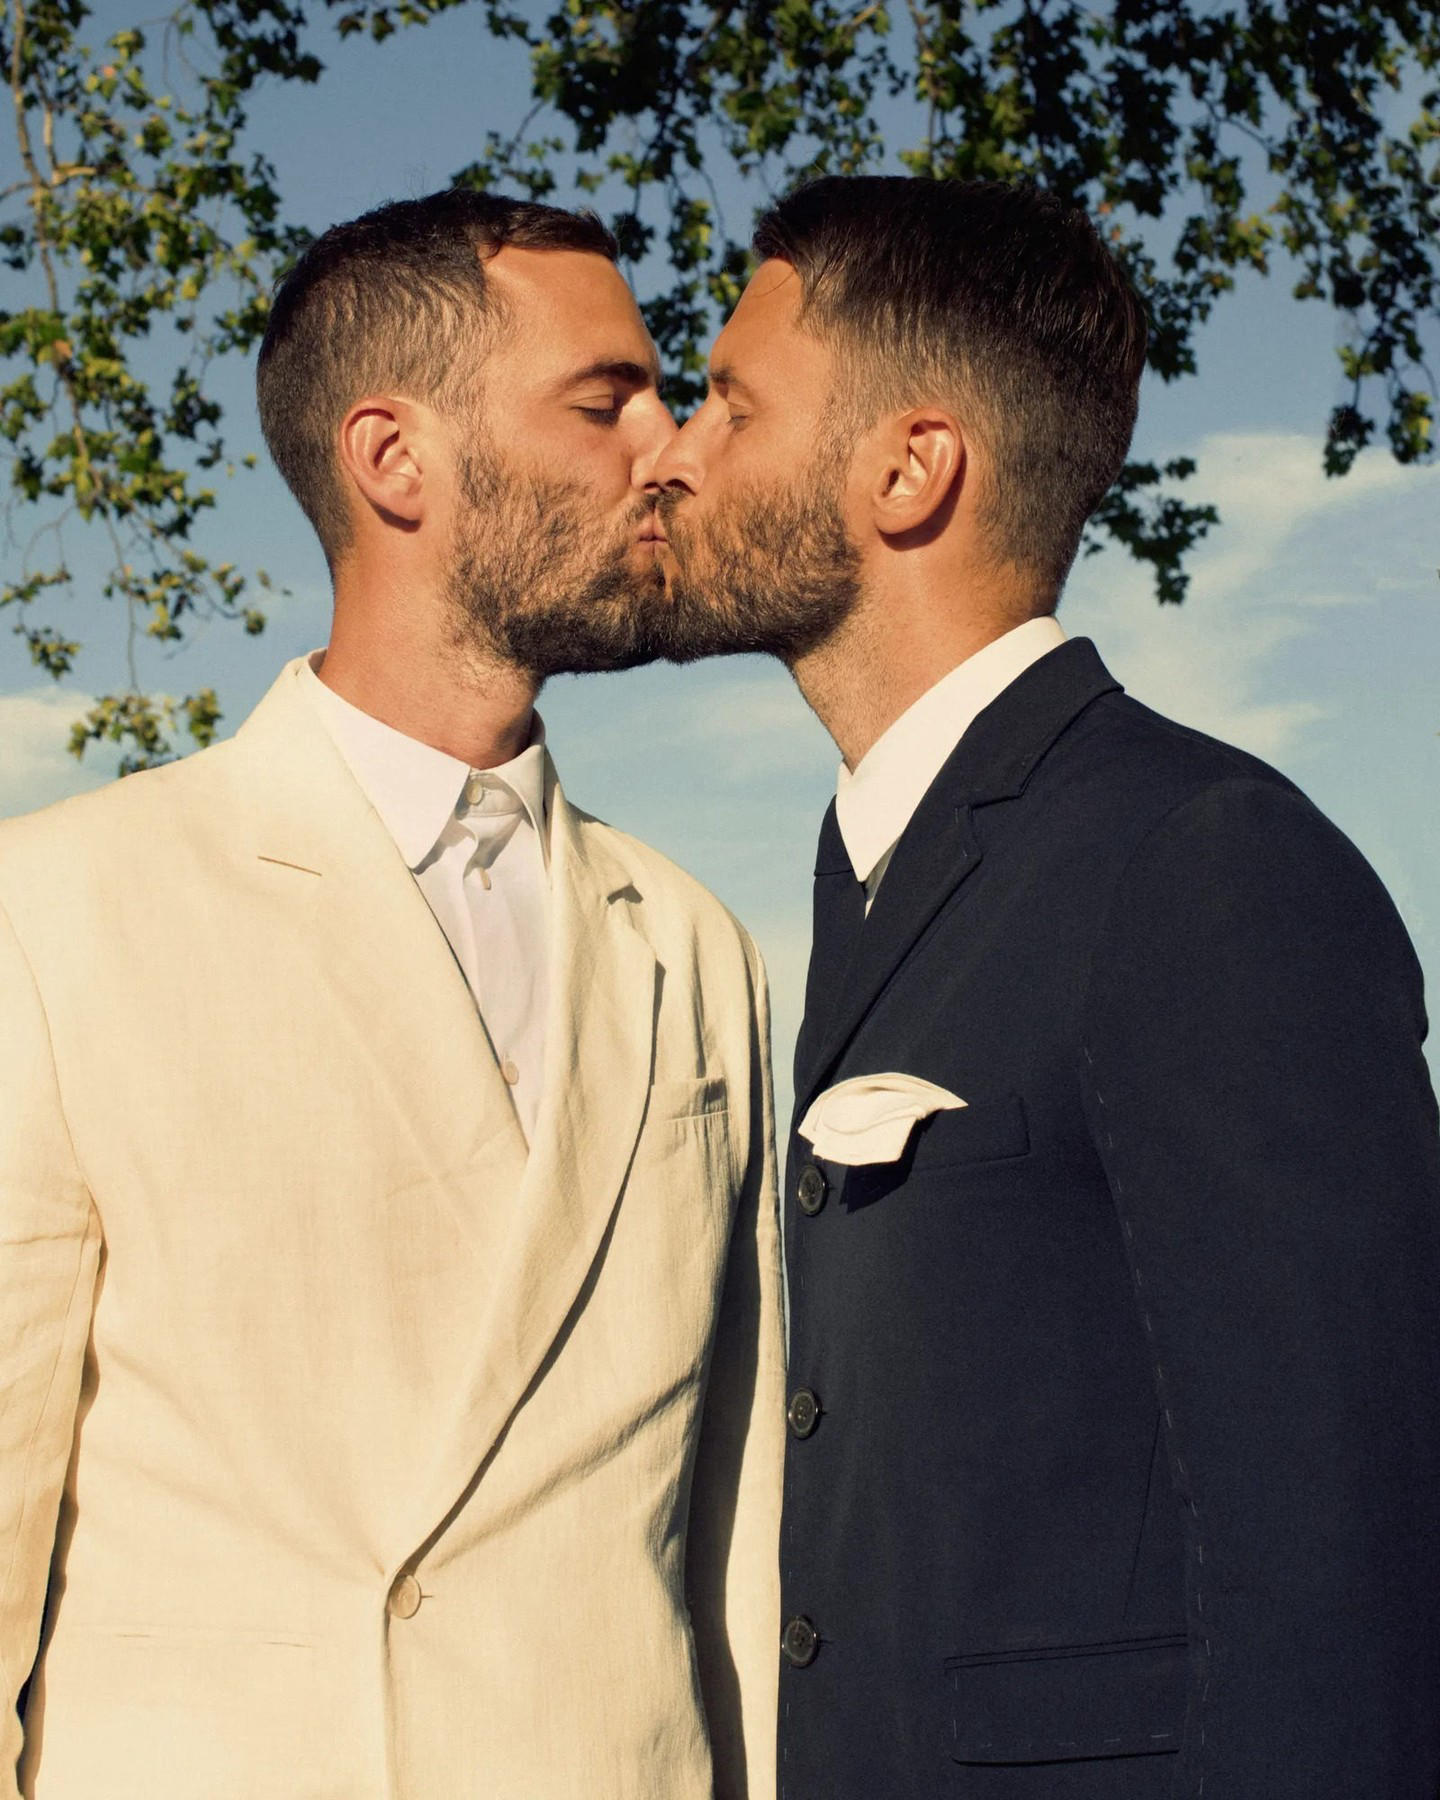 image  1 Vogue - On Saturday, August 27, Simon Porte #Jacquemus and Marco Maestri said “I do” in Charleval, a